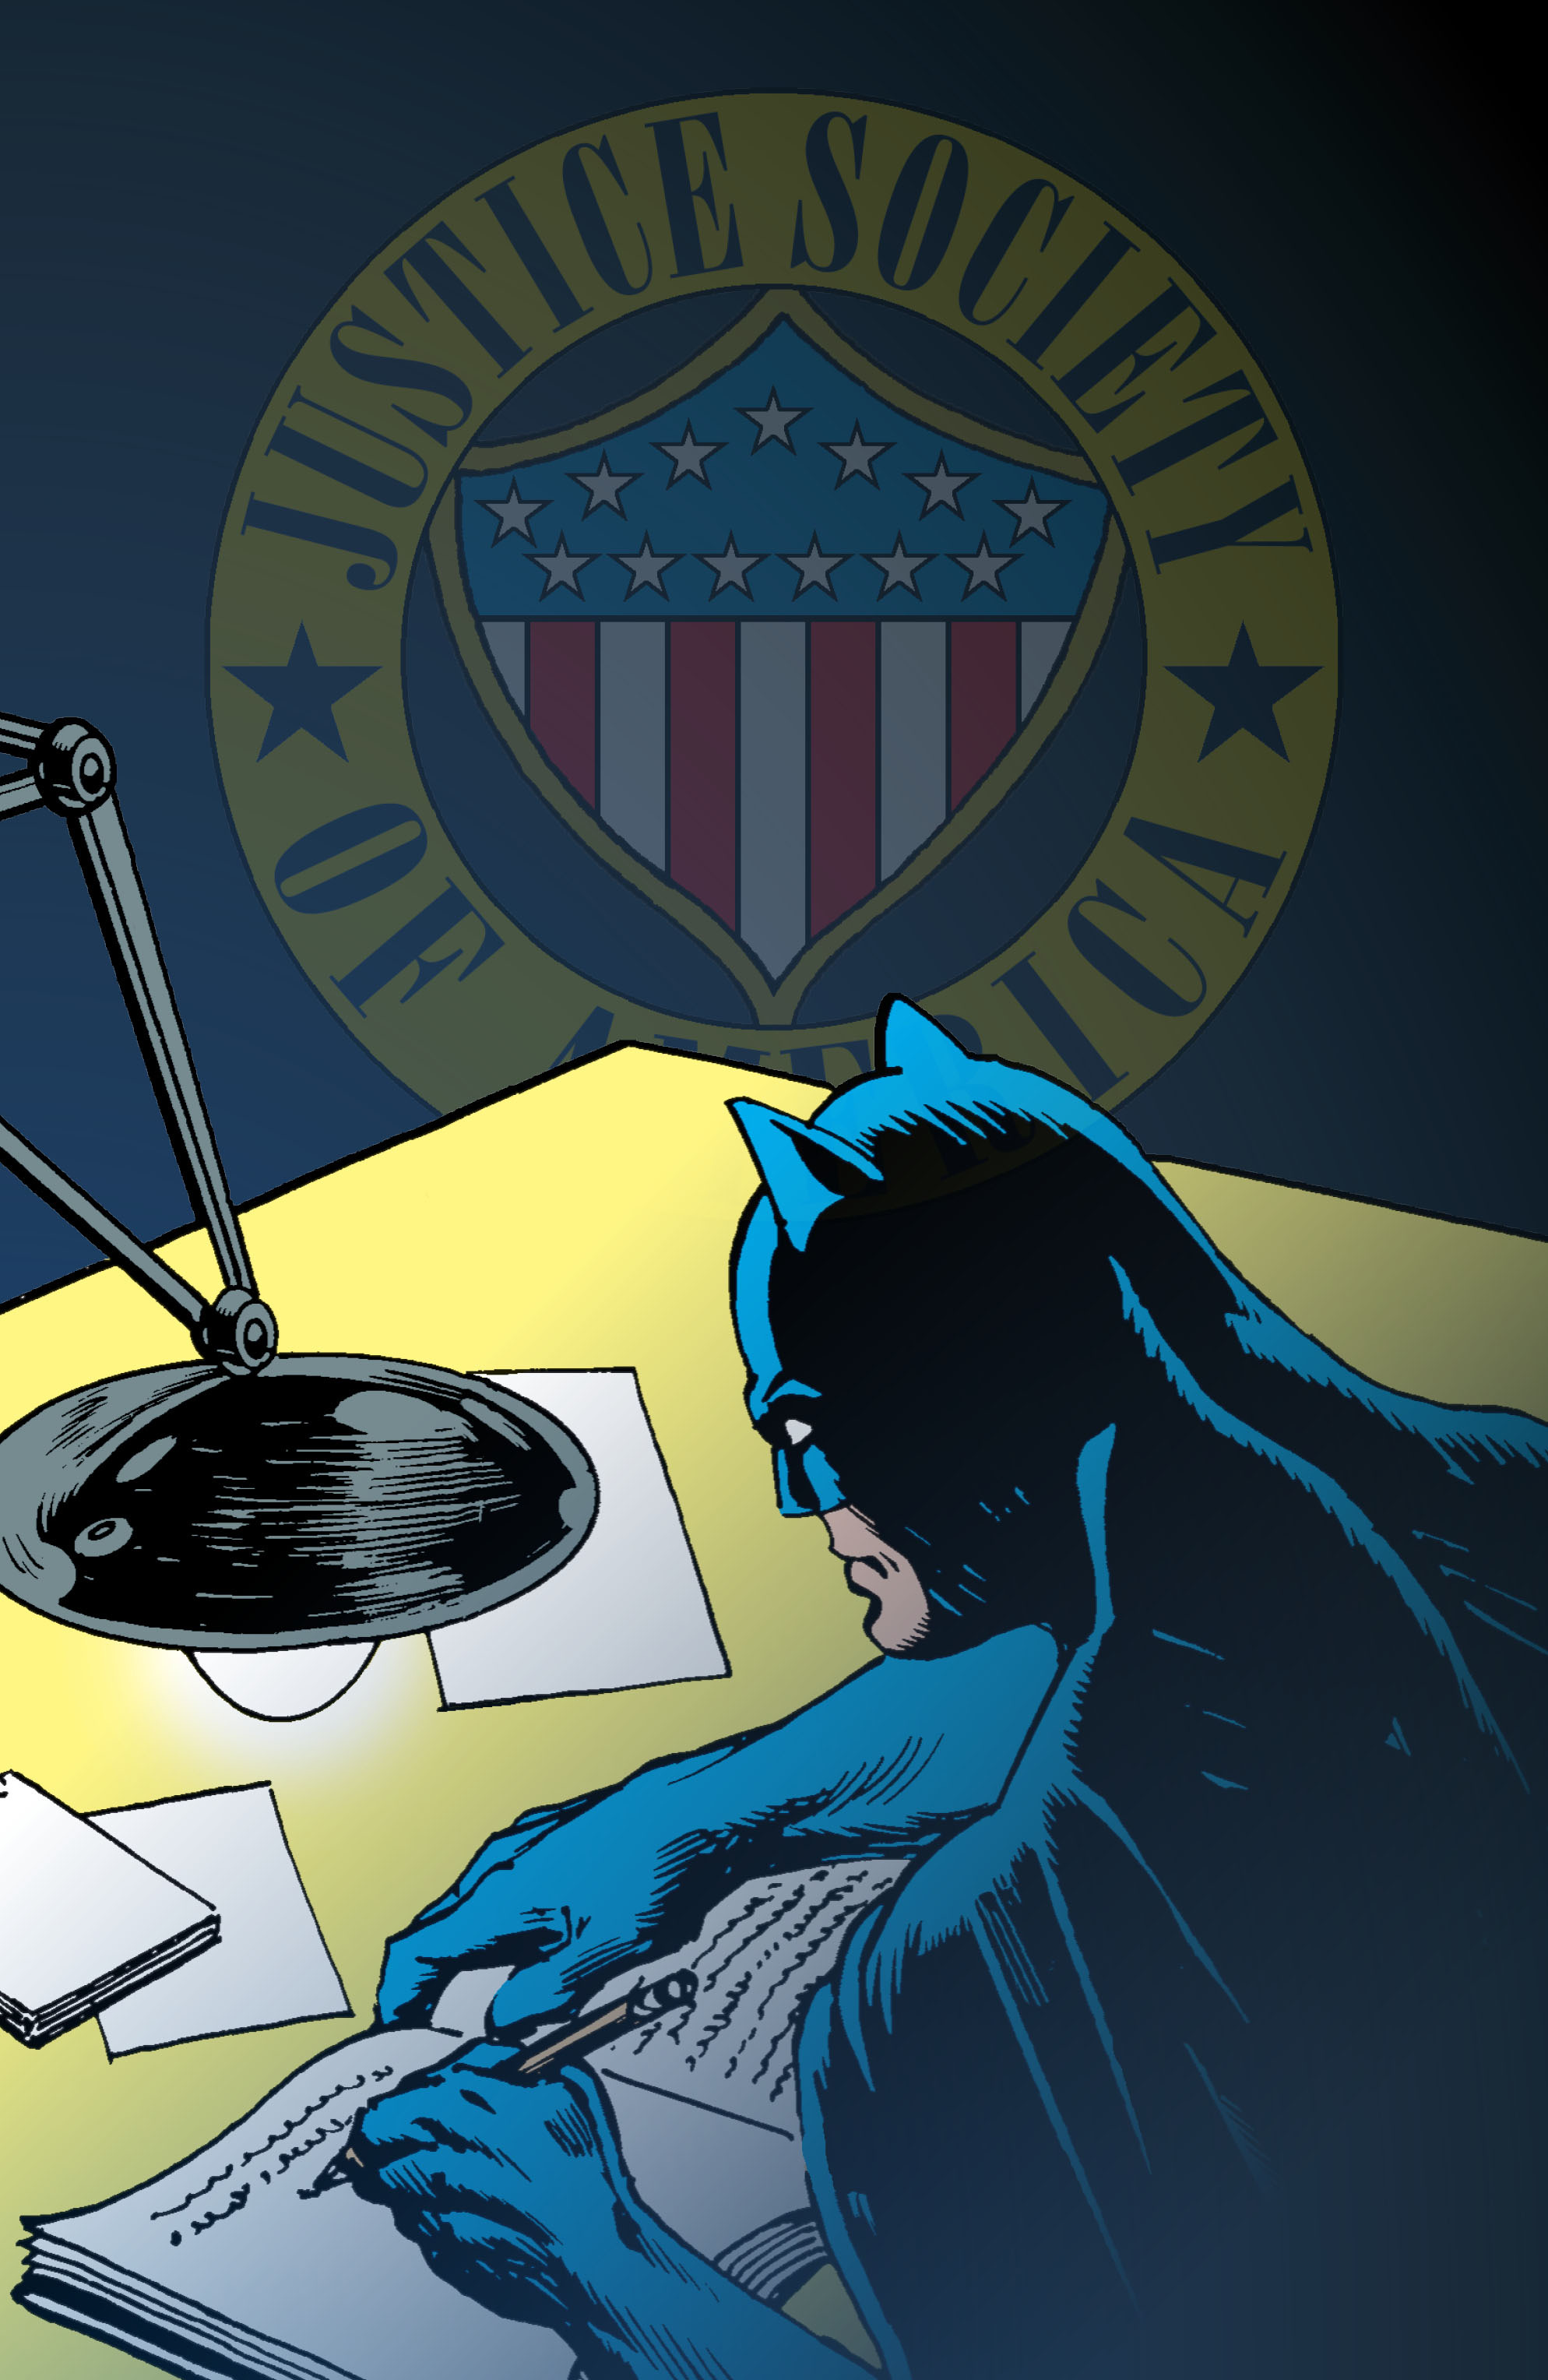 Read online America vs. the Justice Society comic -  Issue # TPB - 7